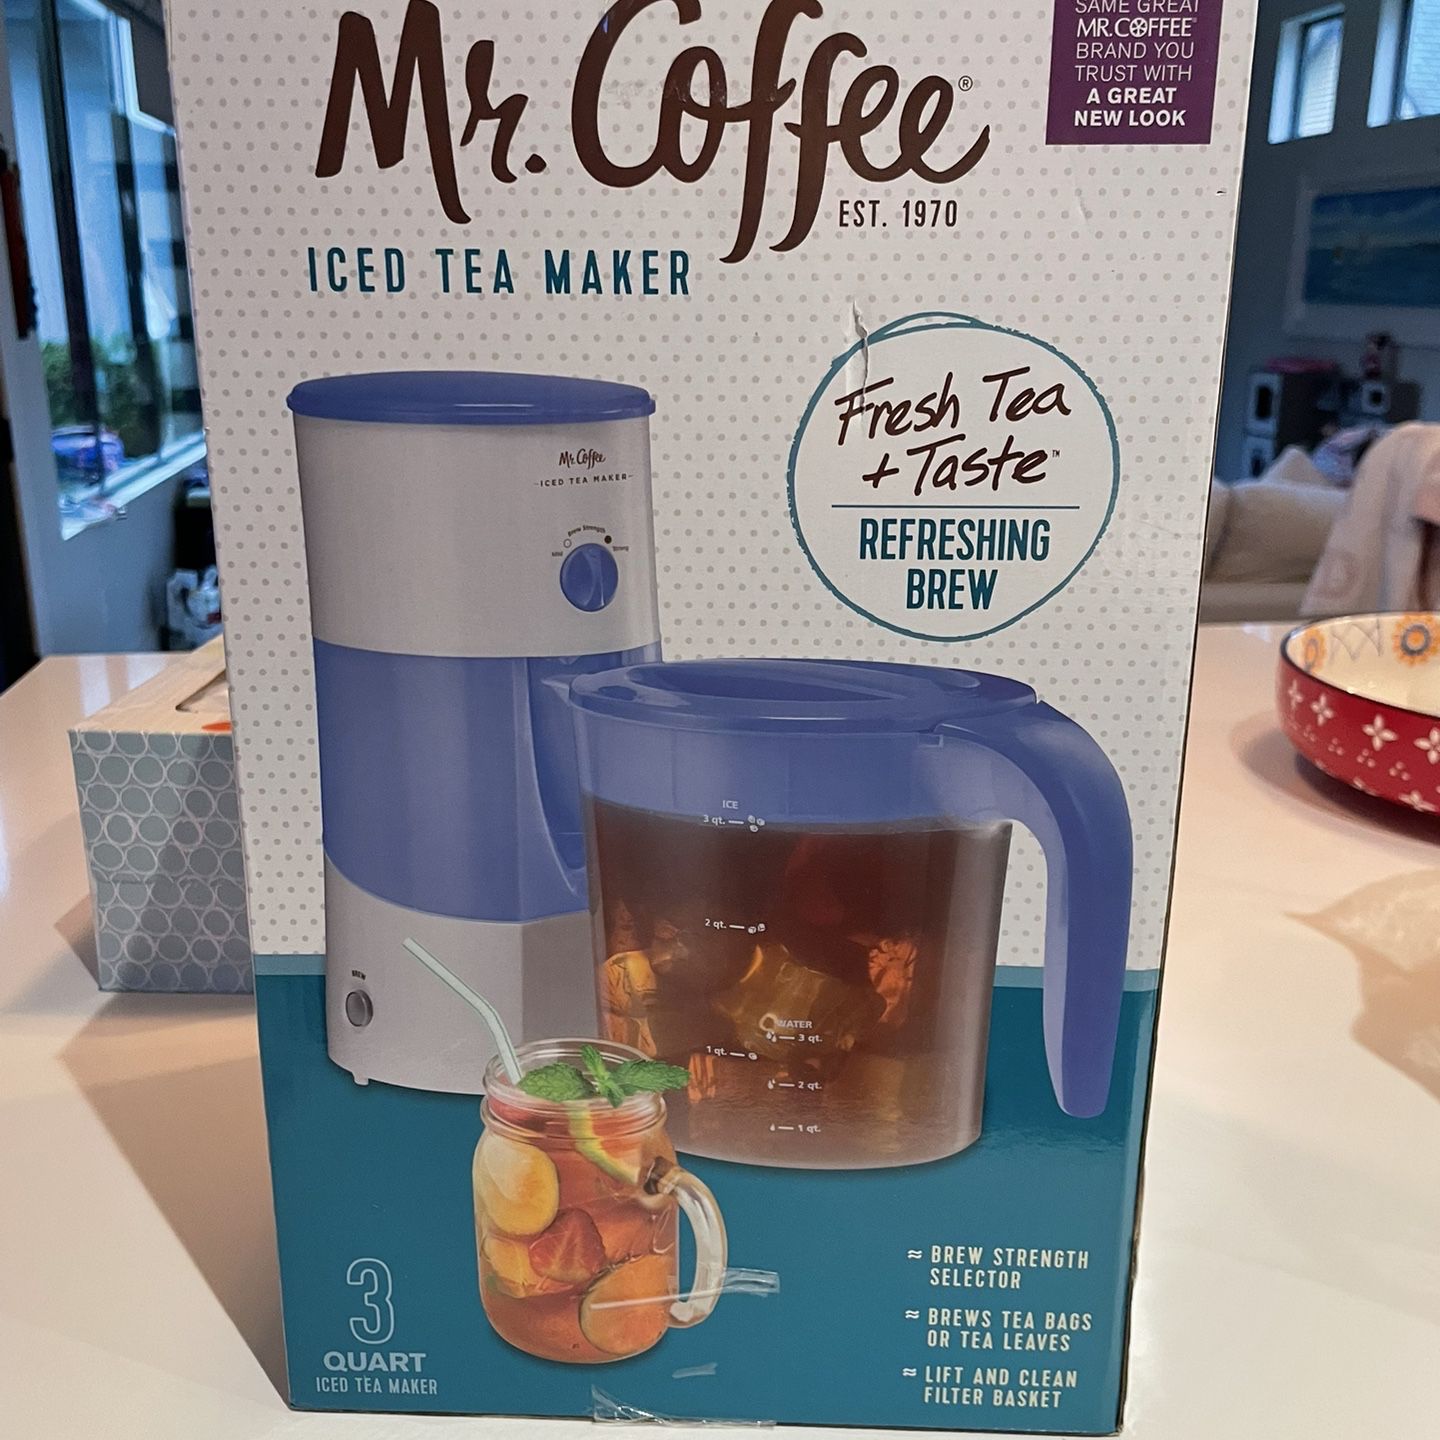 Mr. Coffee Iced Tea Maker for Sale in Houston, TX - OfferUp